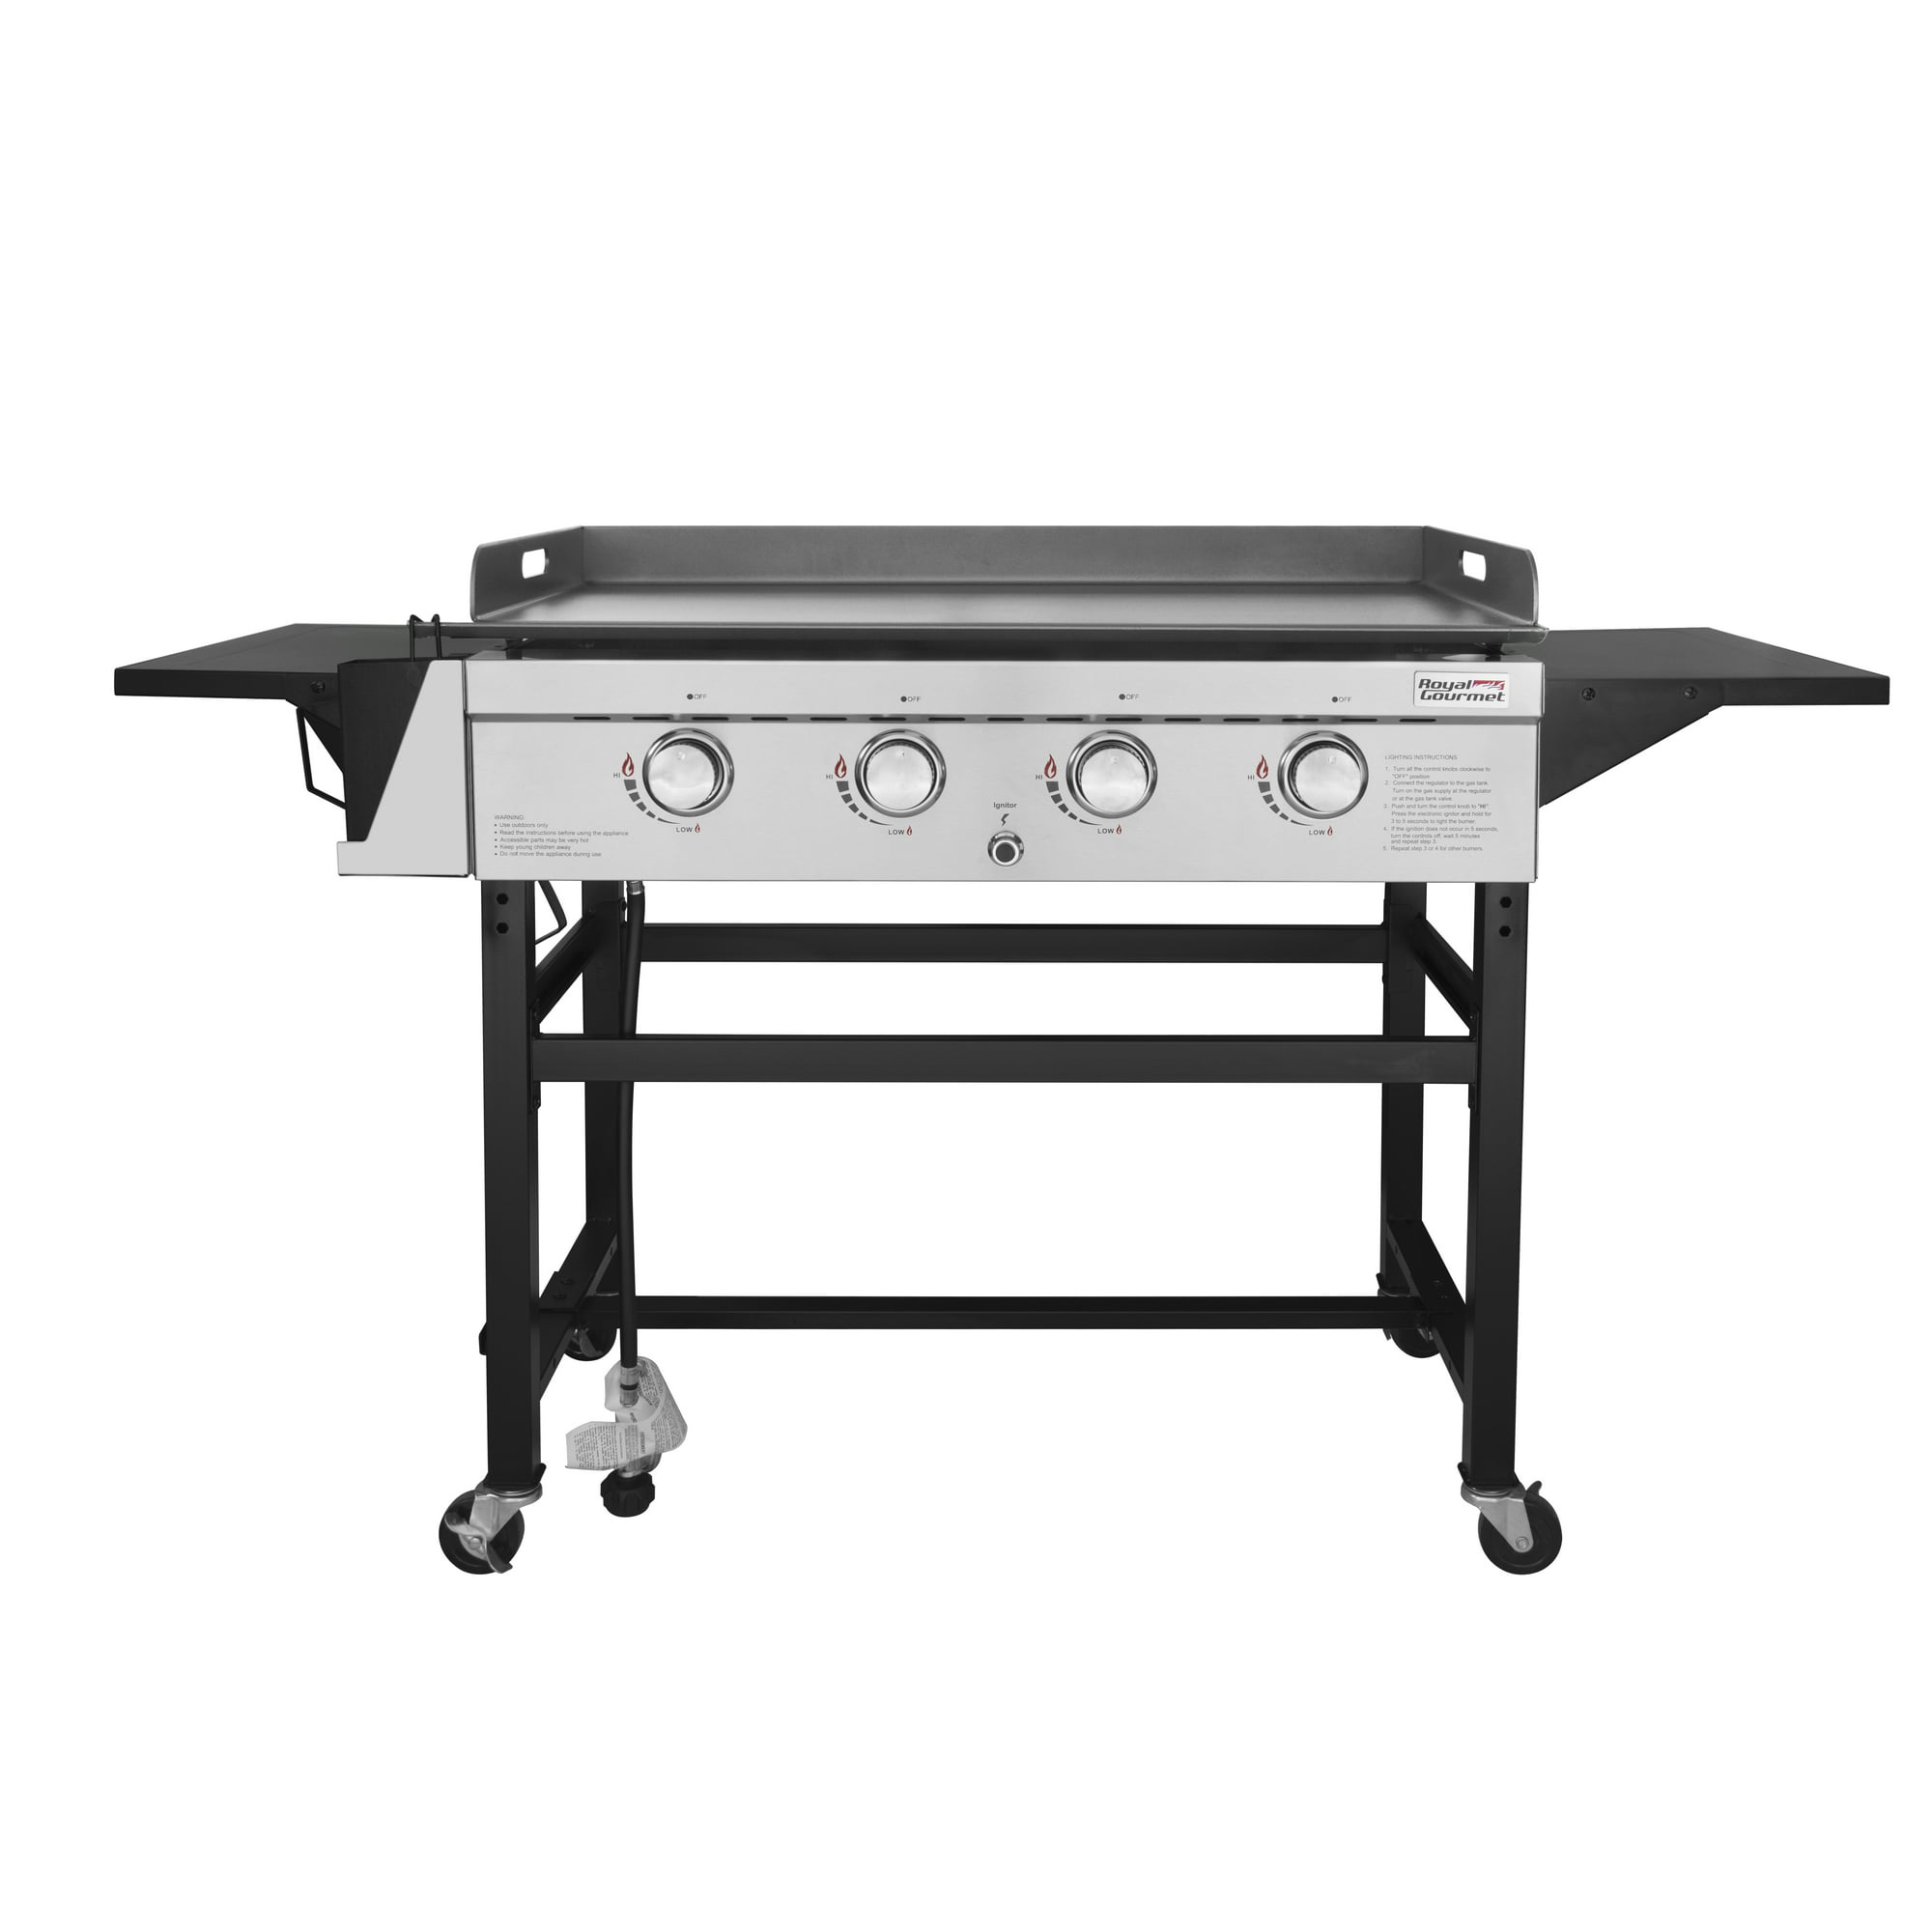 Royal Gourmet GB4001C 4-Burner 52000-BTU Propane Gas Grill Griddle, 36"L, With Cover